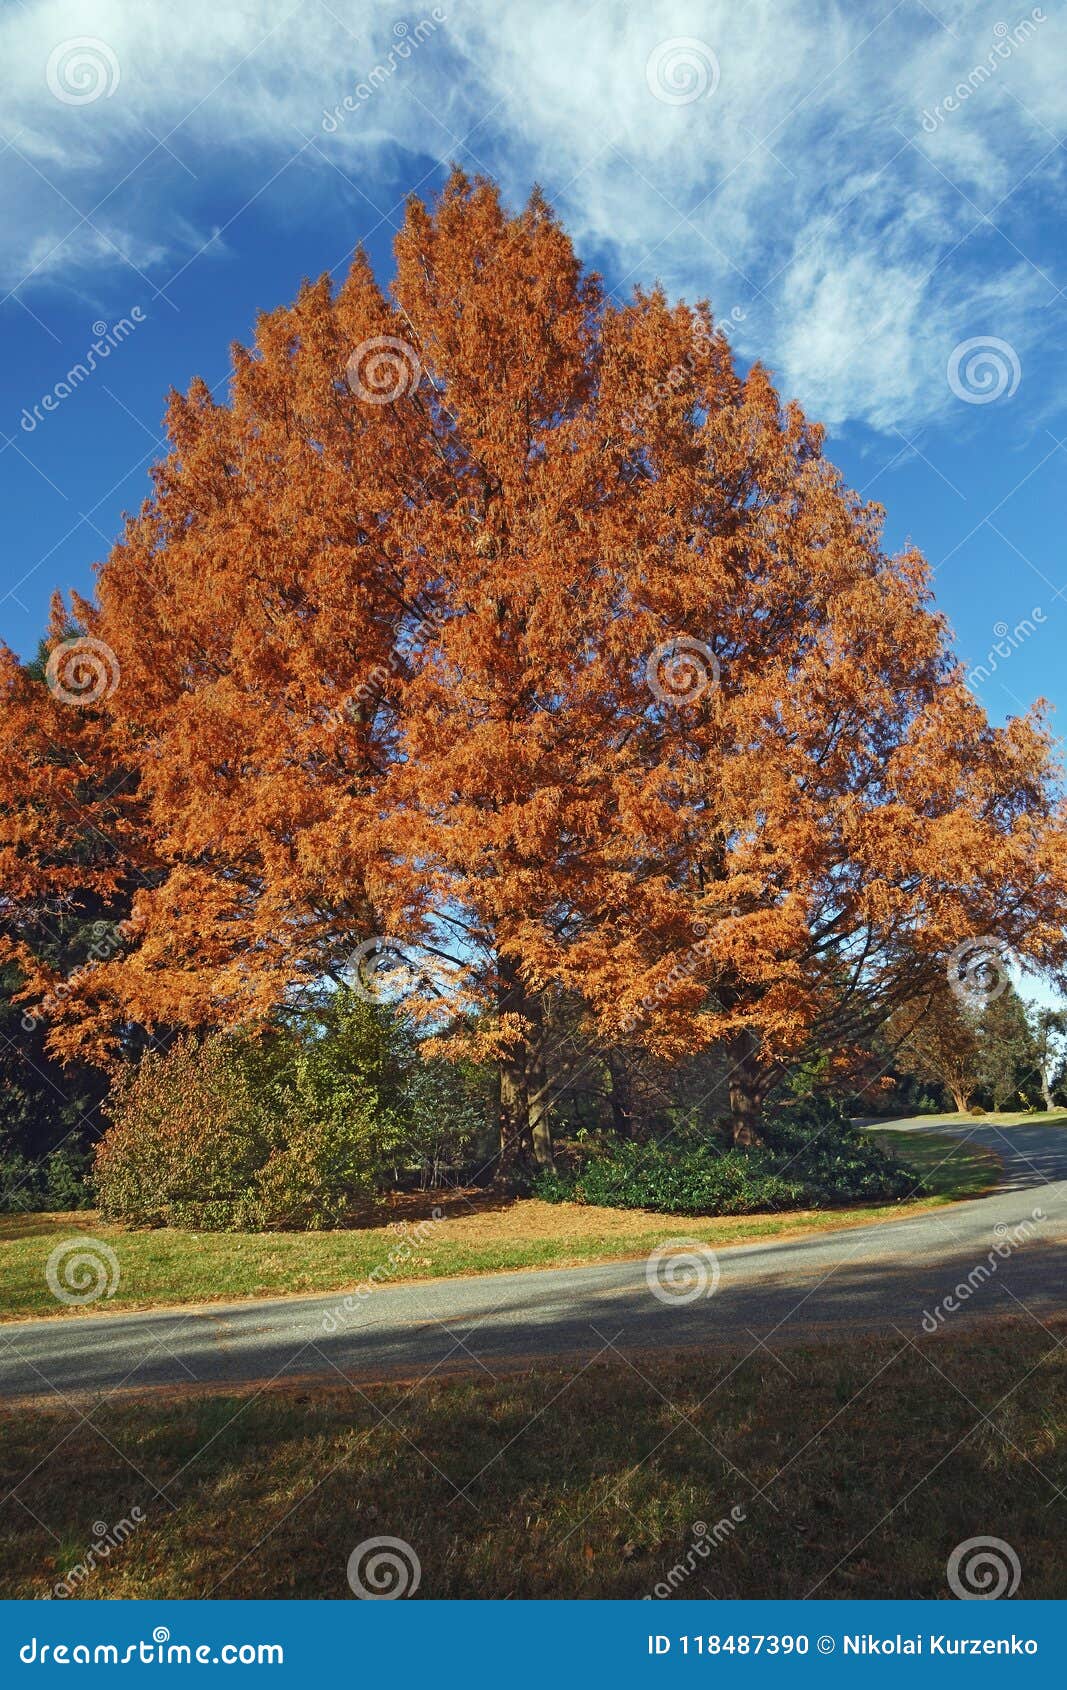 national dawn redwood tree in autumn.